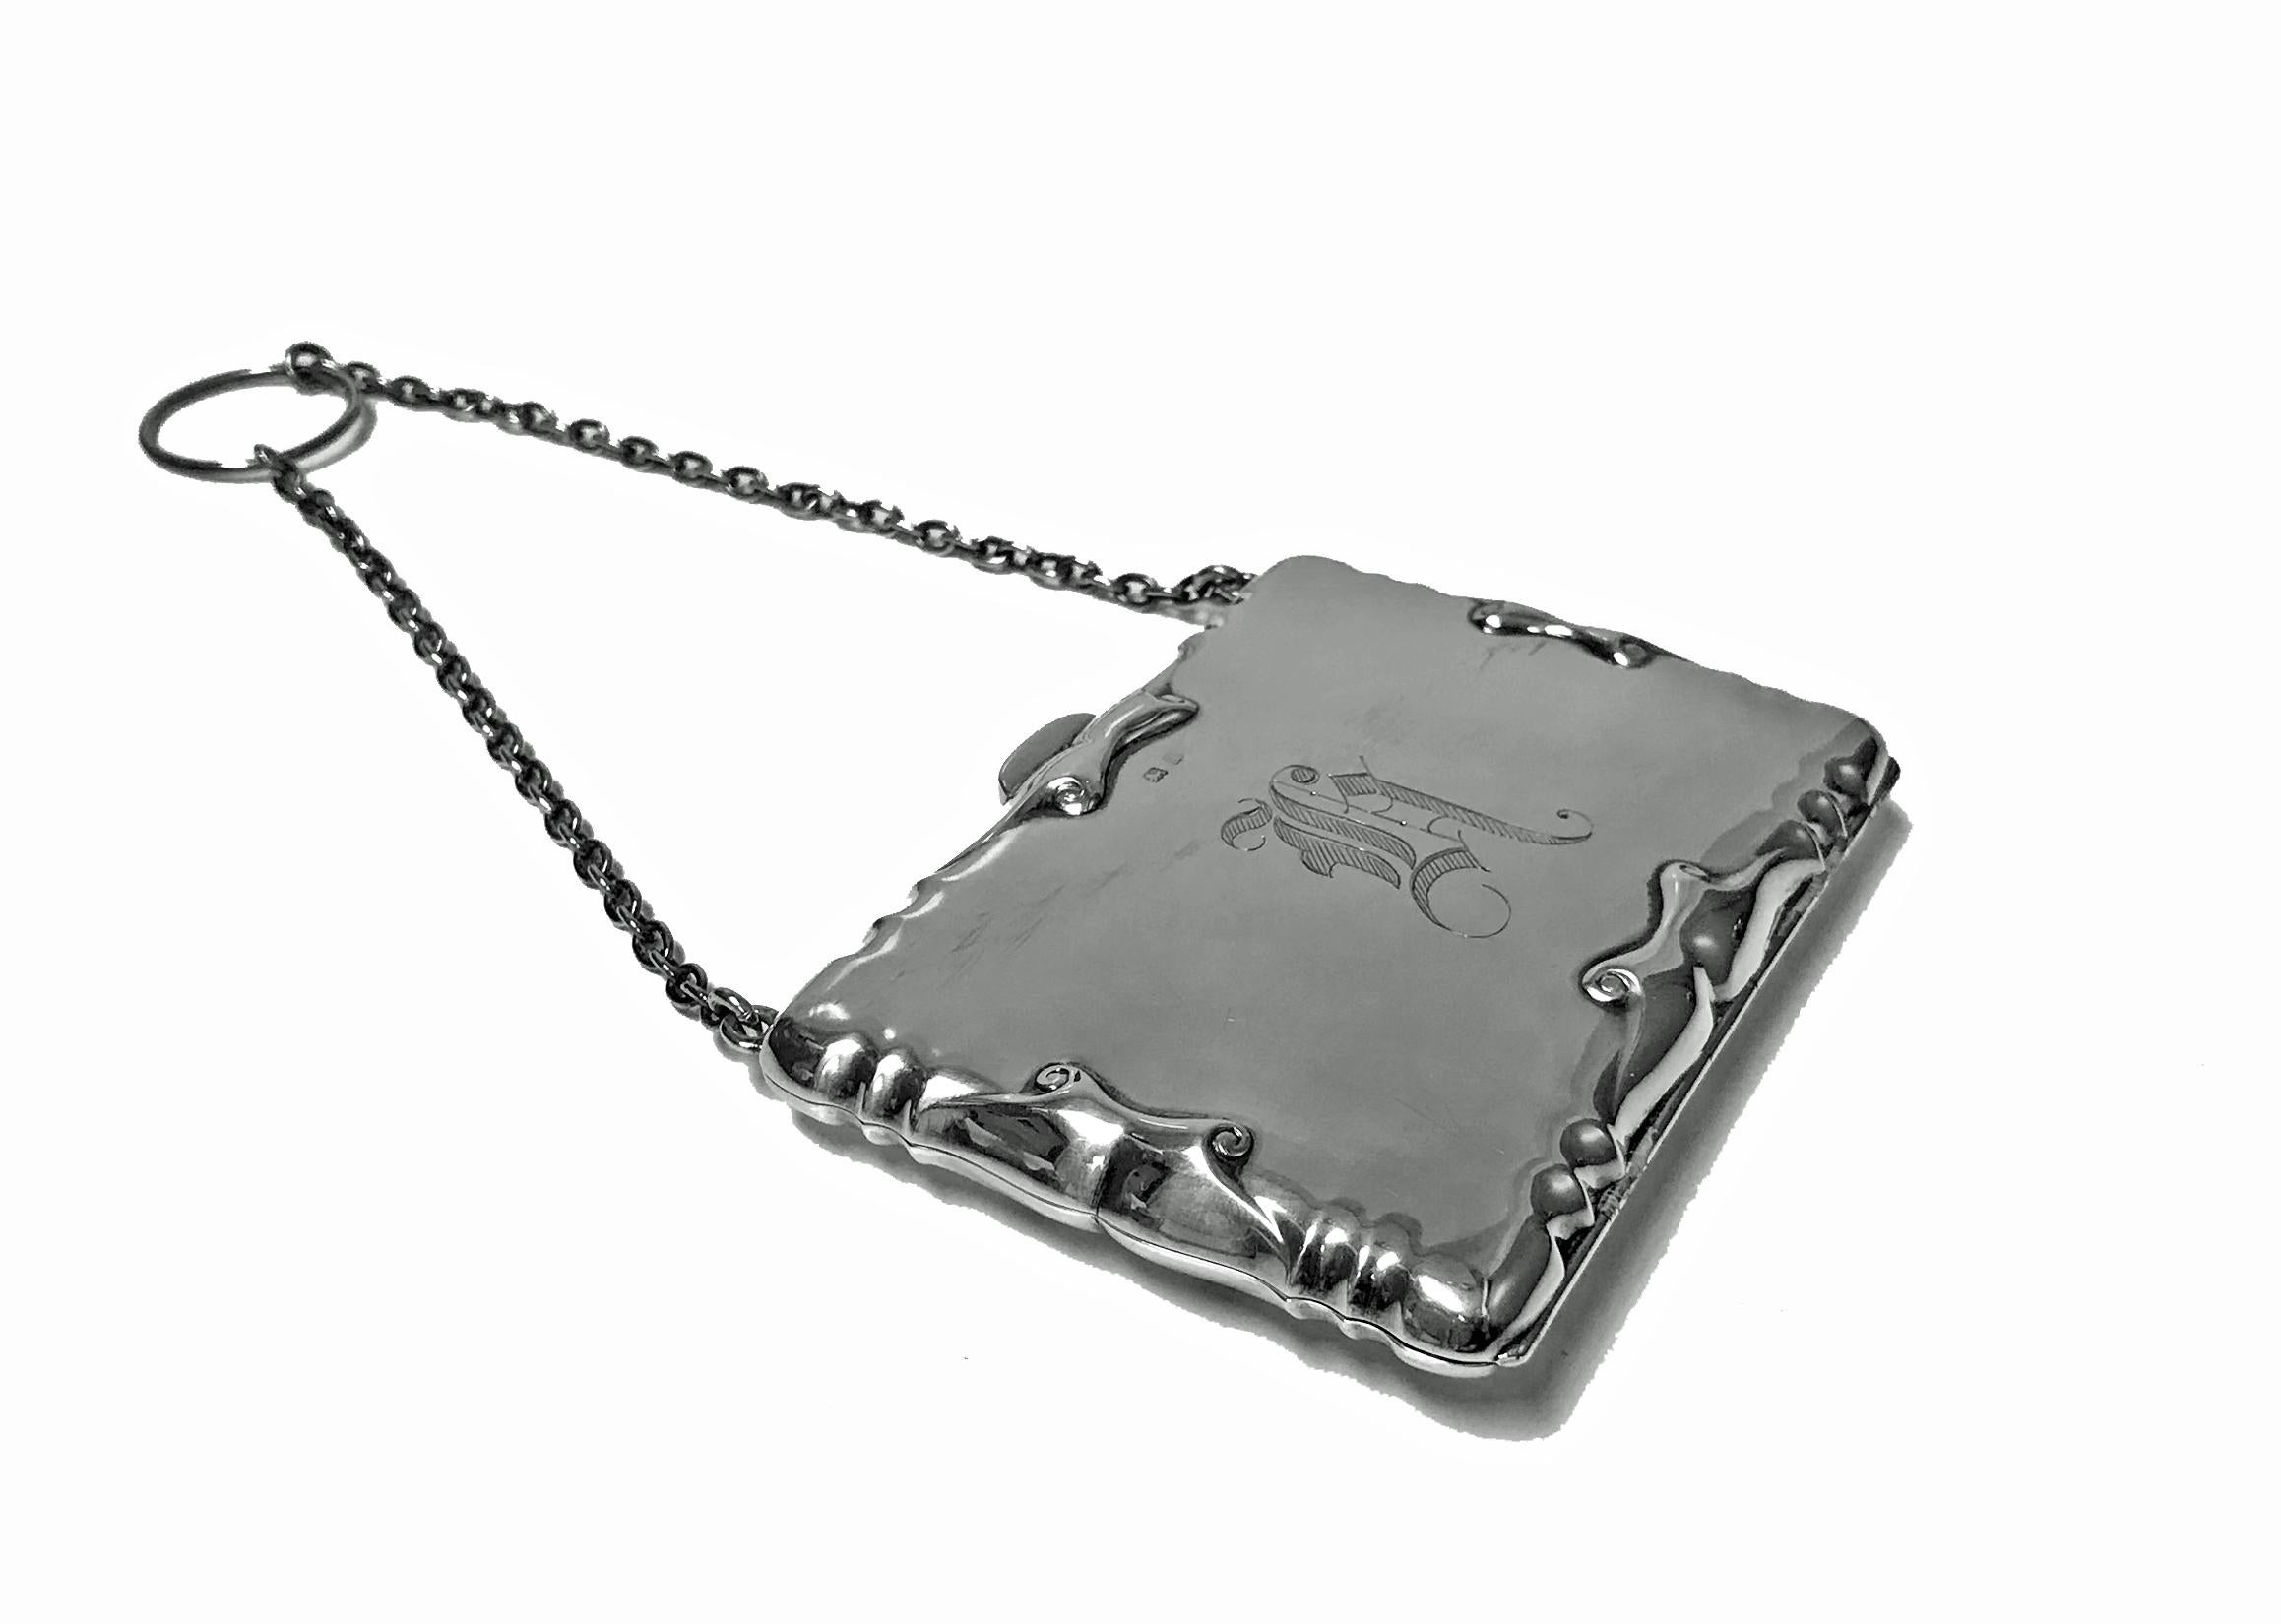 Antique Silver Card Case in form of Aide Memoire Purse, Birmingham 1908, William Hair Haseler. Art Nouveau elaborate border surround, monogram possibly H. The interior with green lining and dividers and pencil. Measures: 3.75 x 2.75 inches